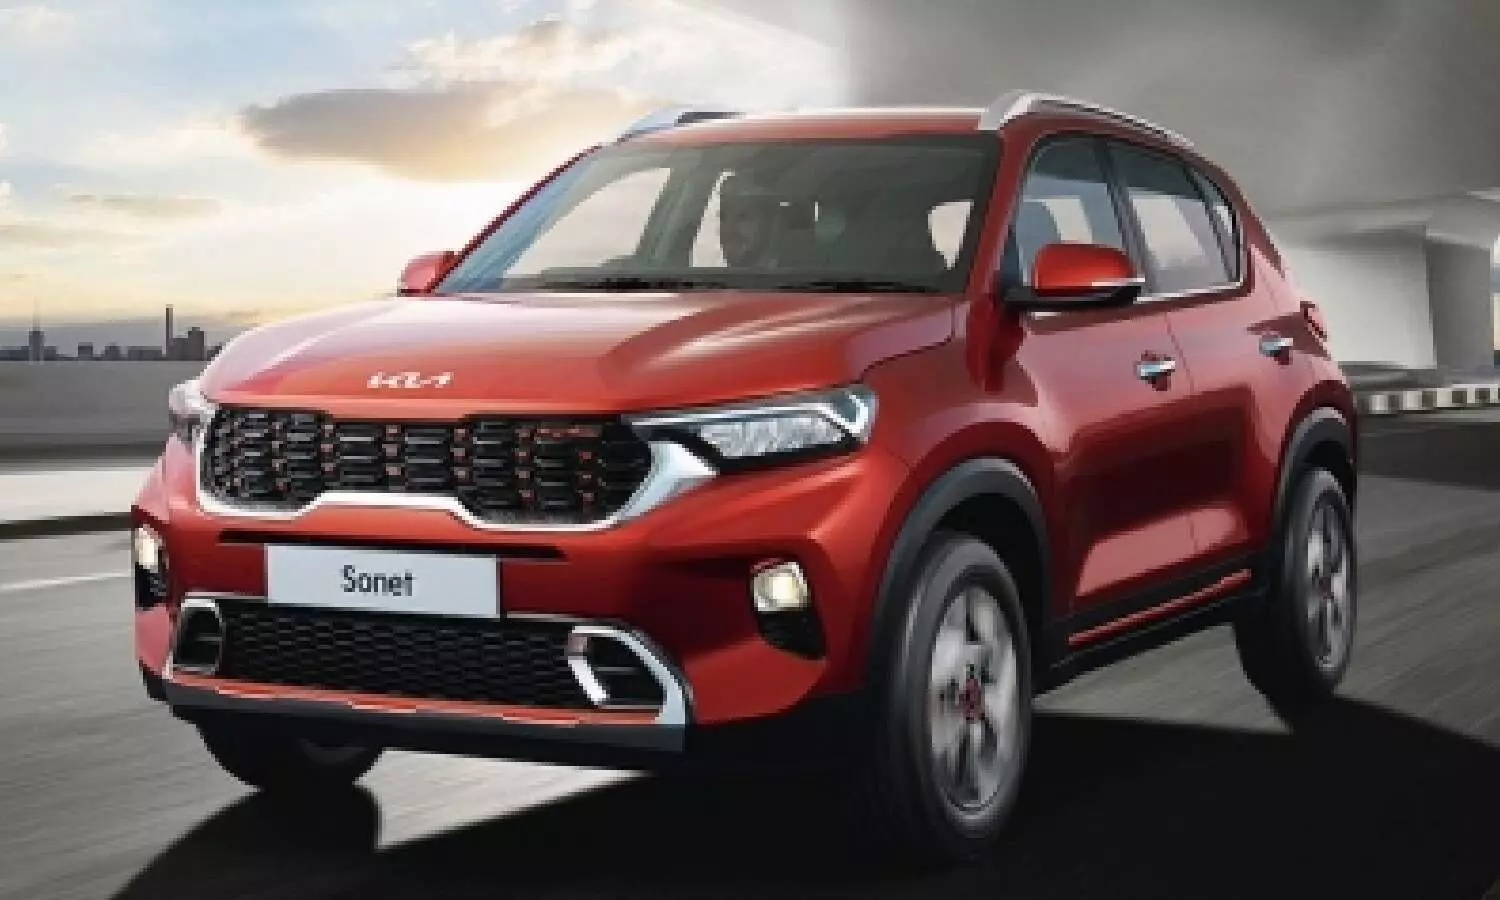 Kia Sonet crosses one lakh sales-mark in less than 12 months